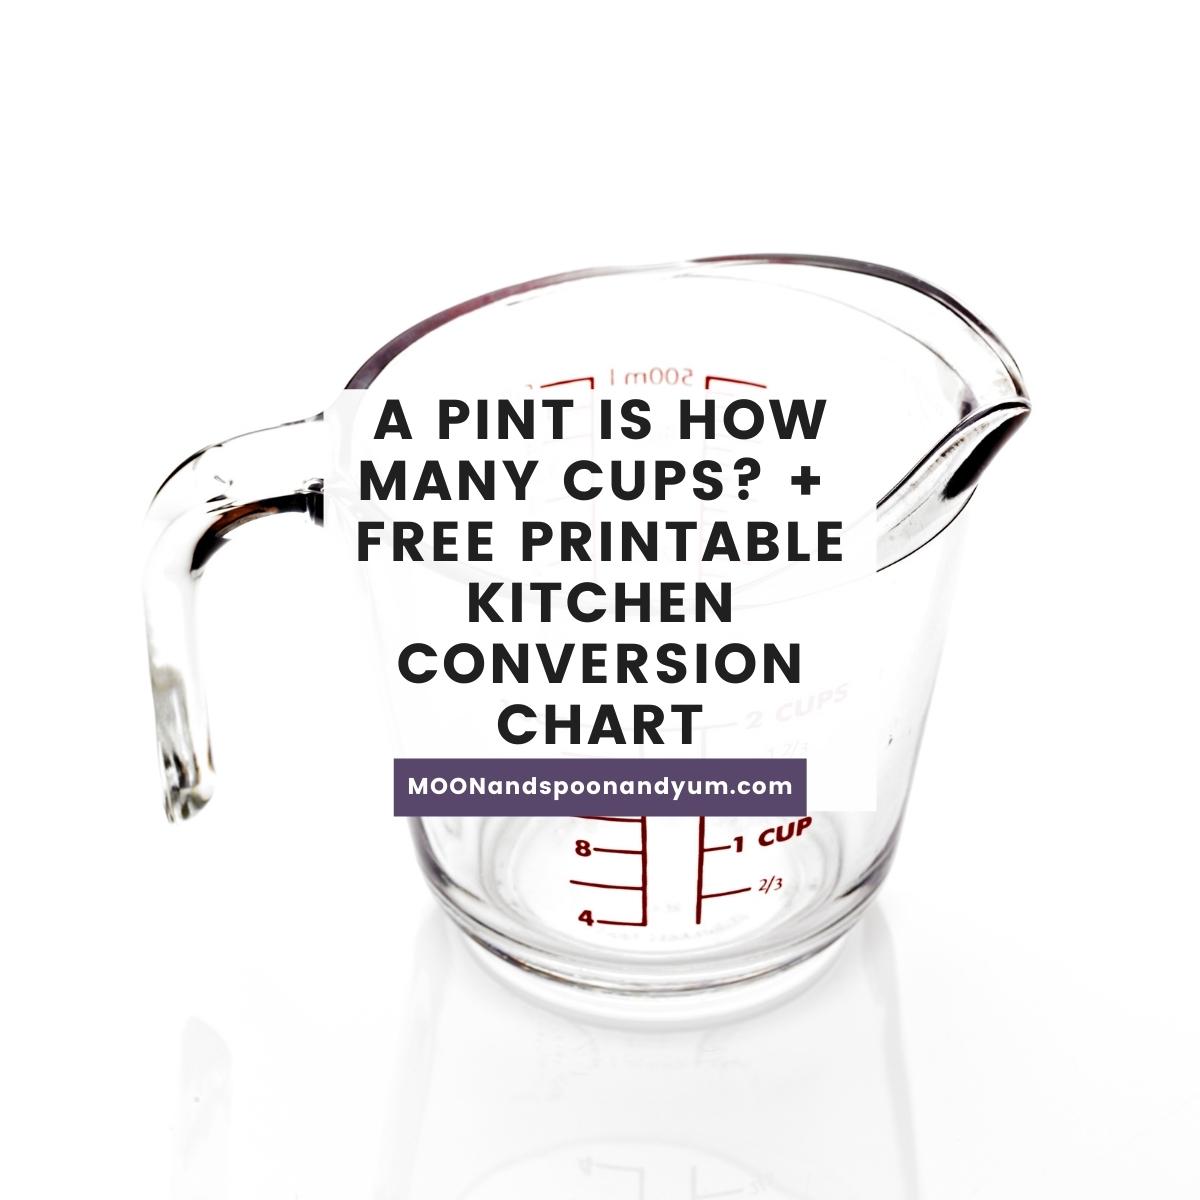 A Pint is How Many Cups? + Free Printable Chart